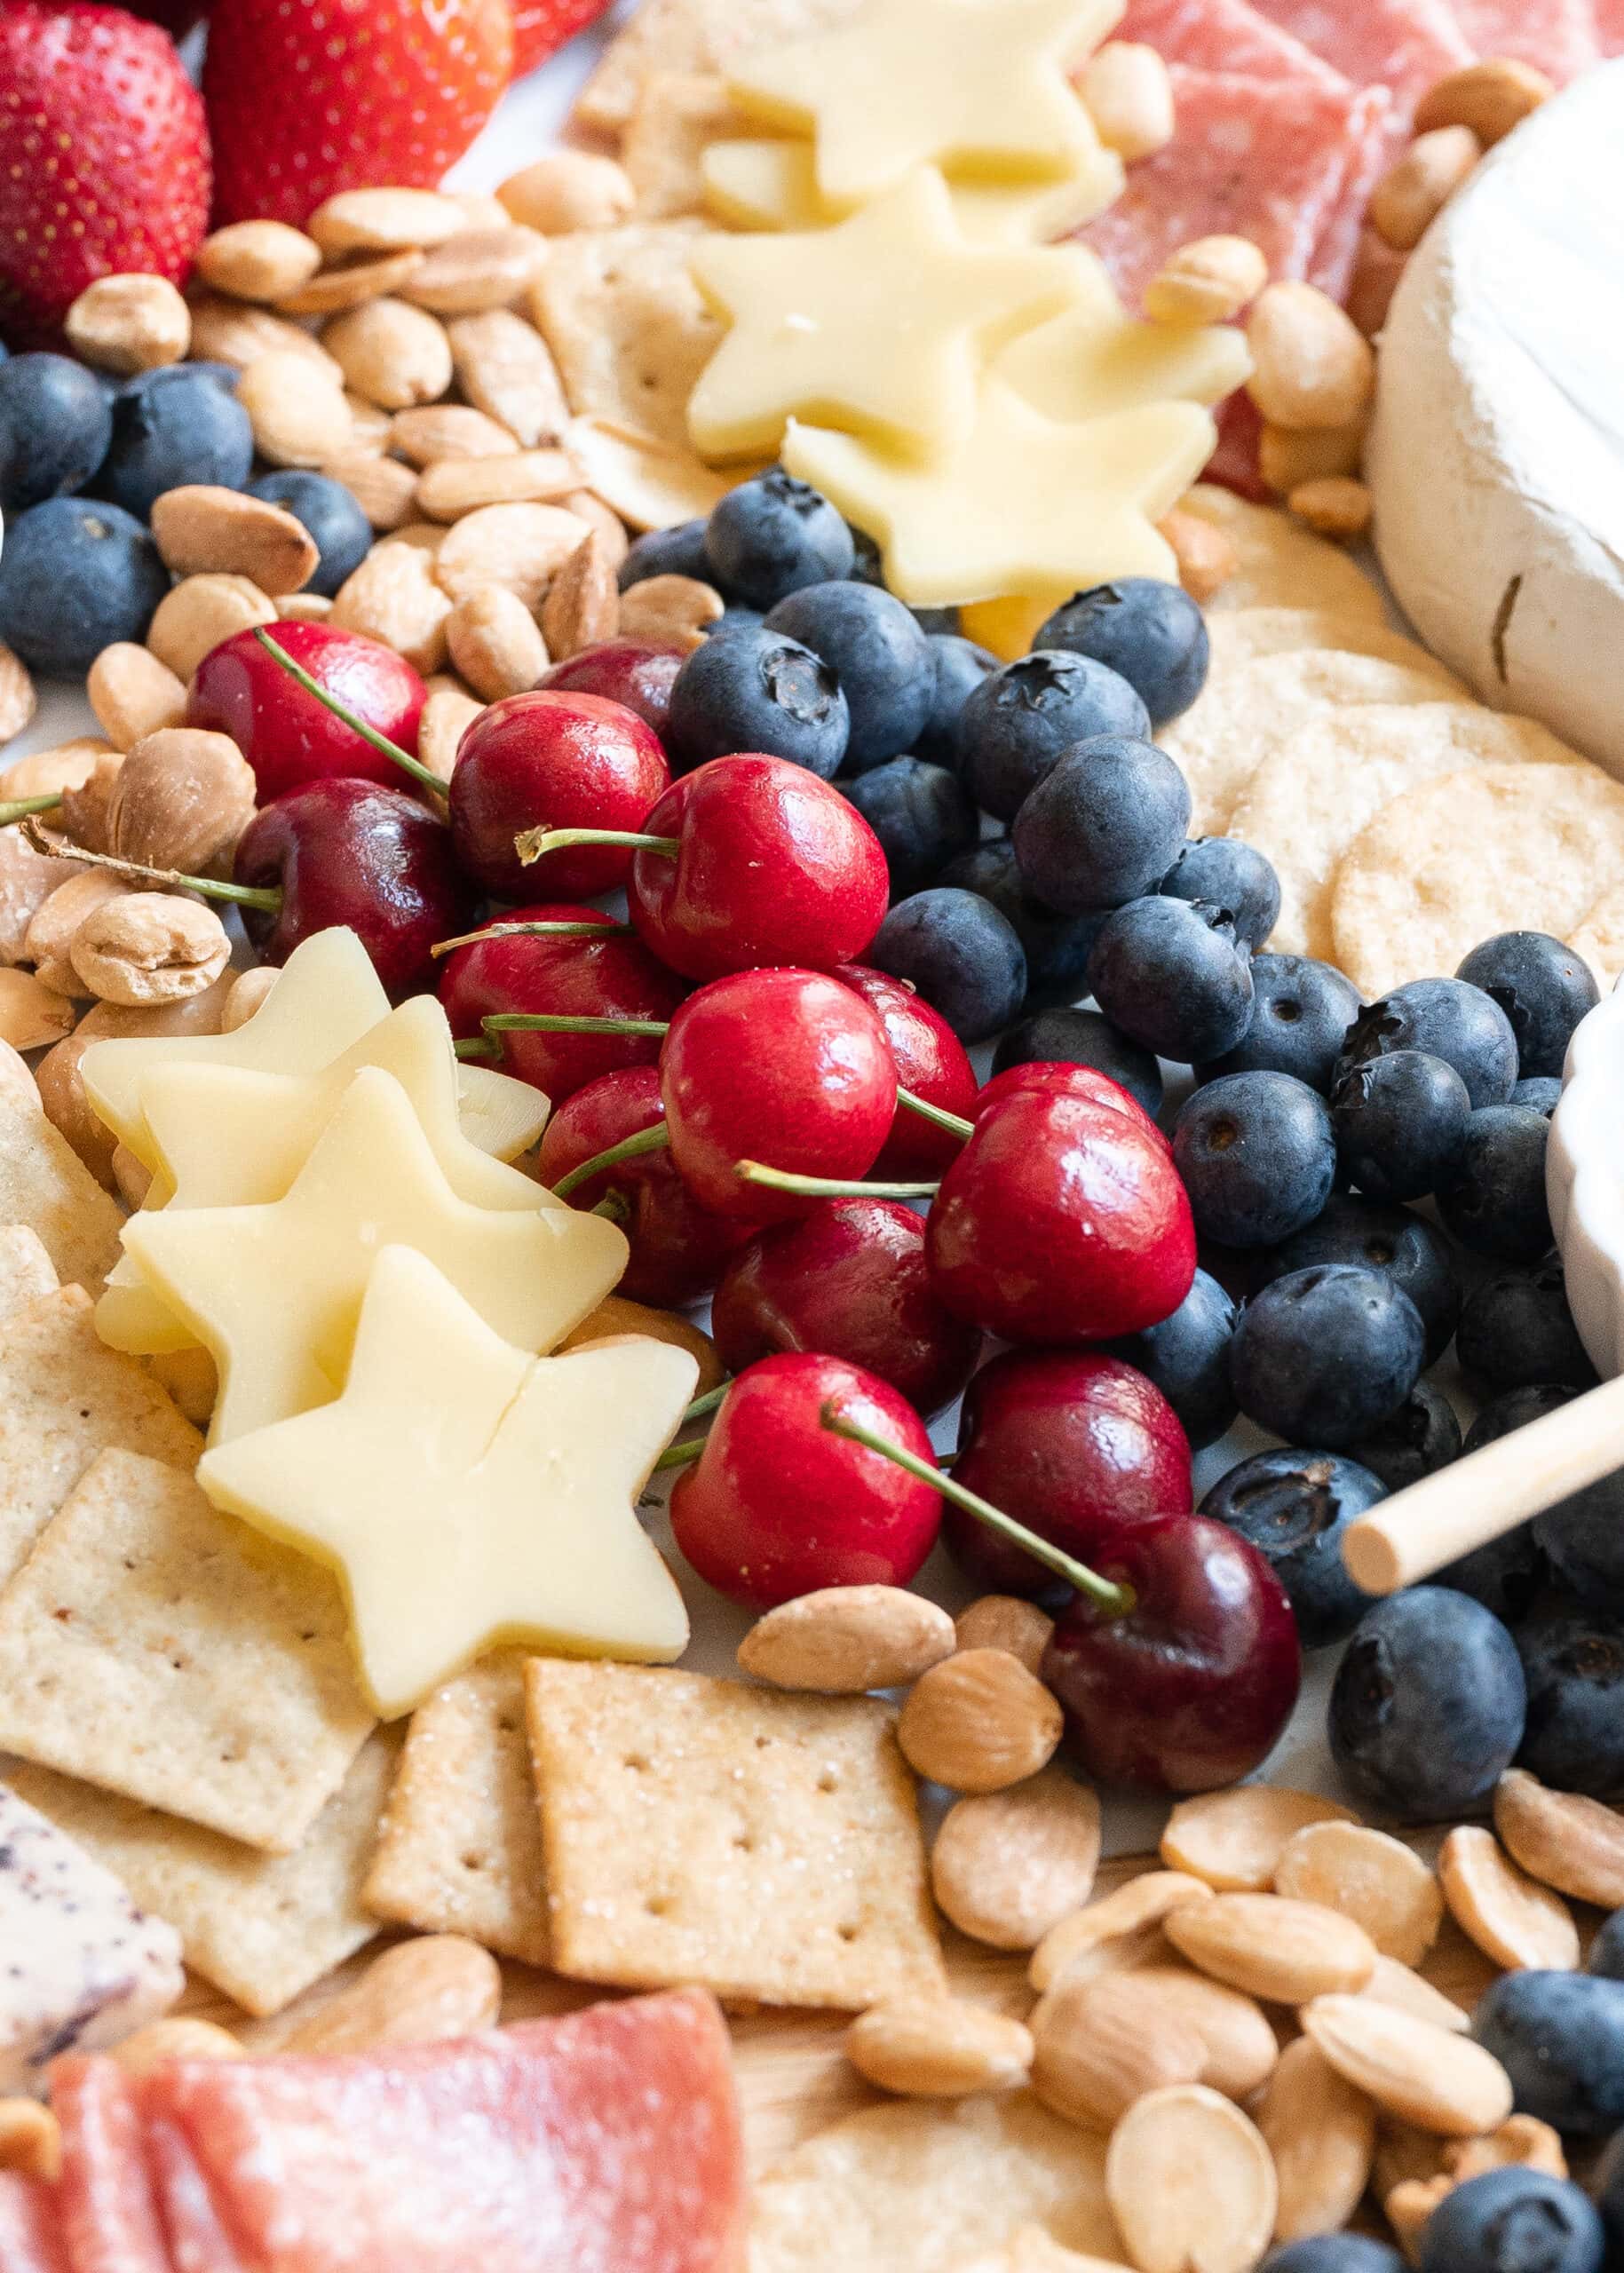 I took this close up photo of the various gluten-free crackers, cheeses, nuts, and fruits on the board.